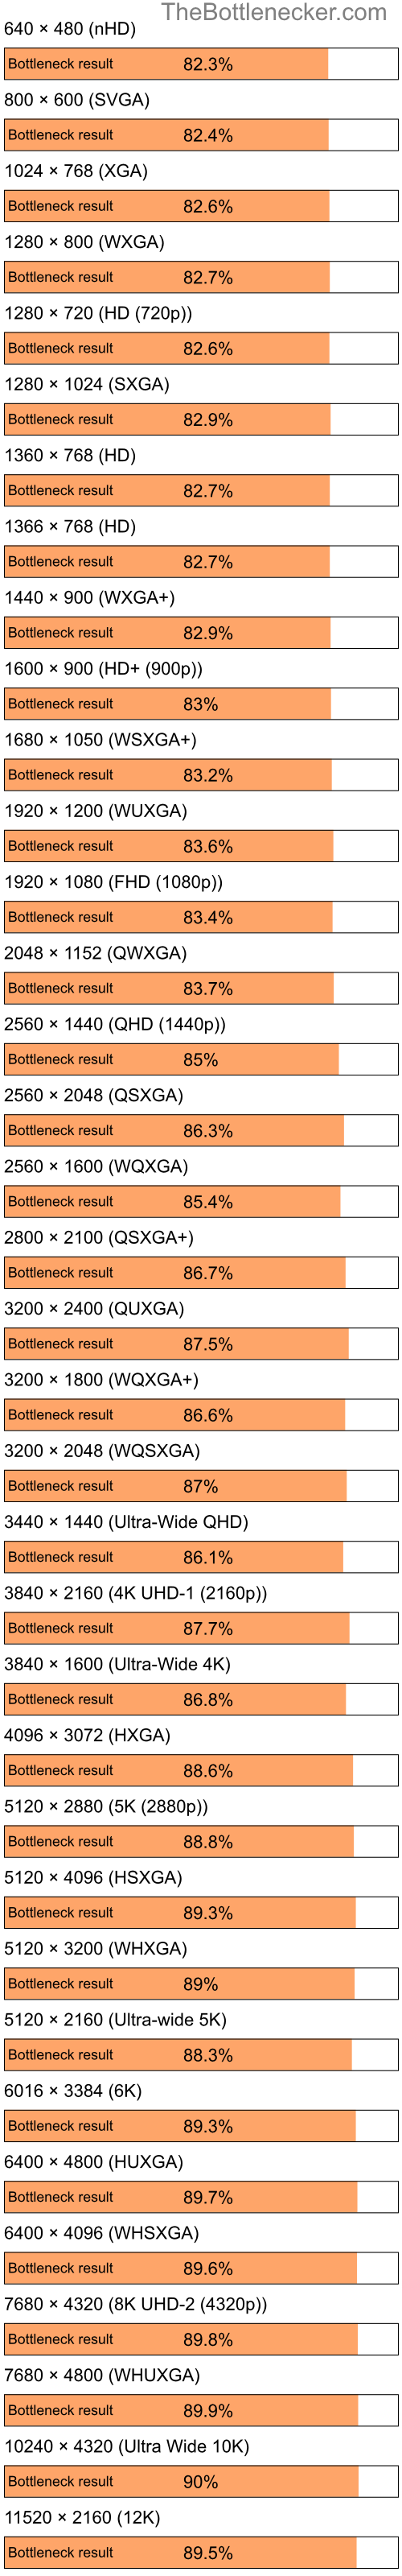 Bottleneck results by resolution for Intel Pentium 4 and NVIDIA GeForce FX 5500 in Processor Intense Tasks